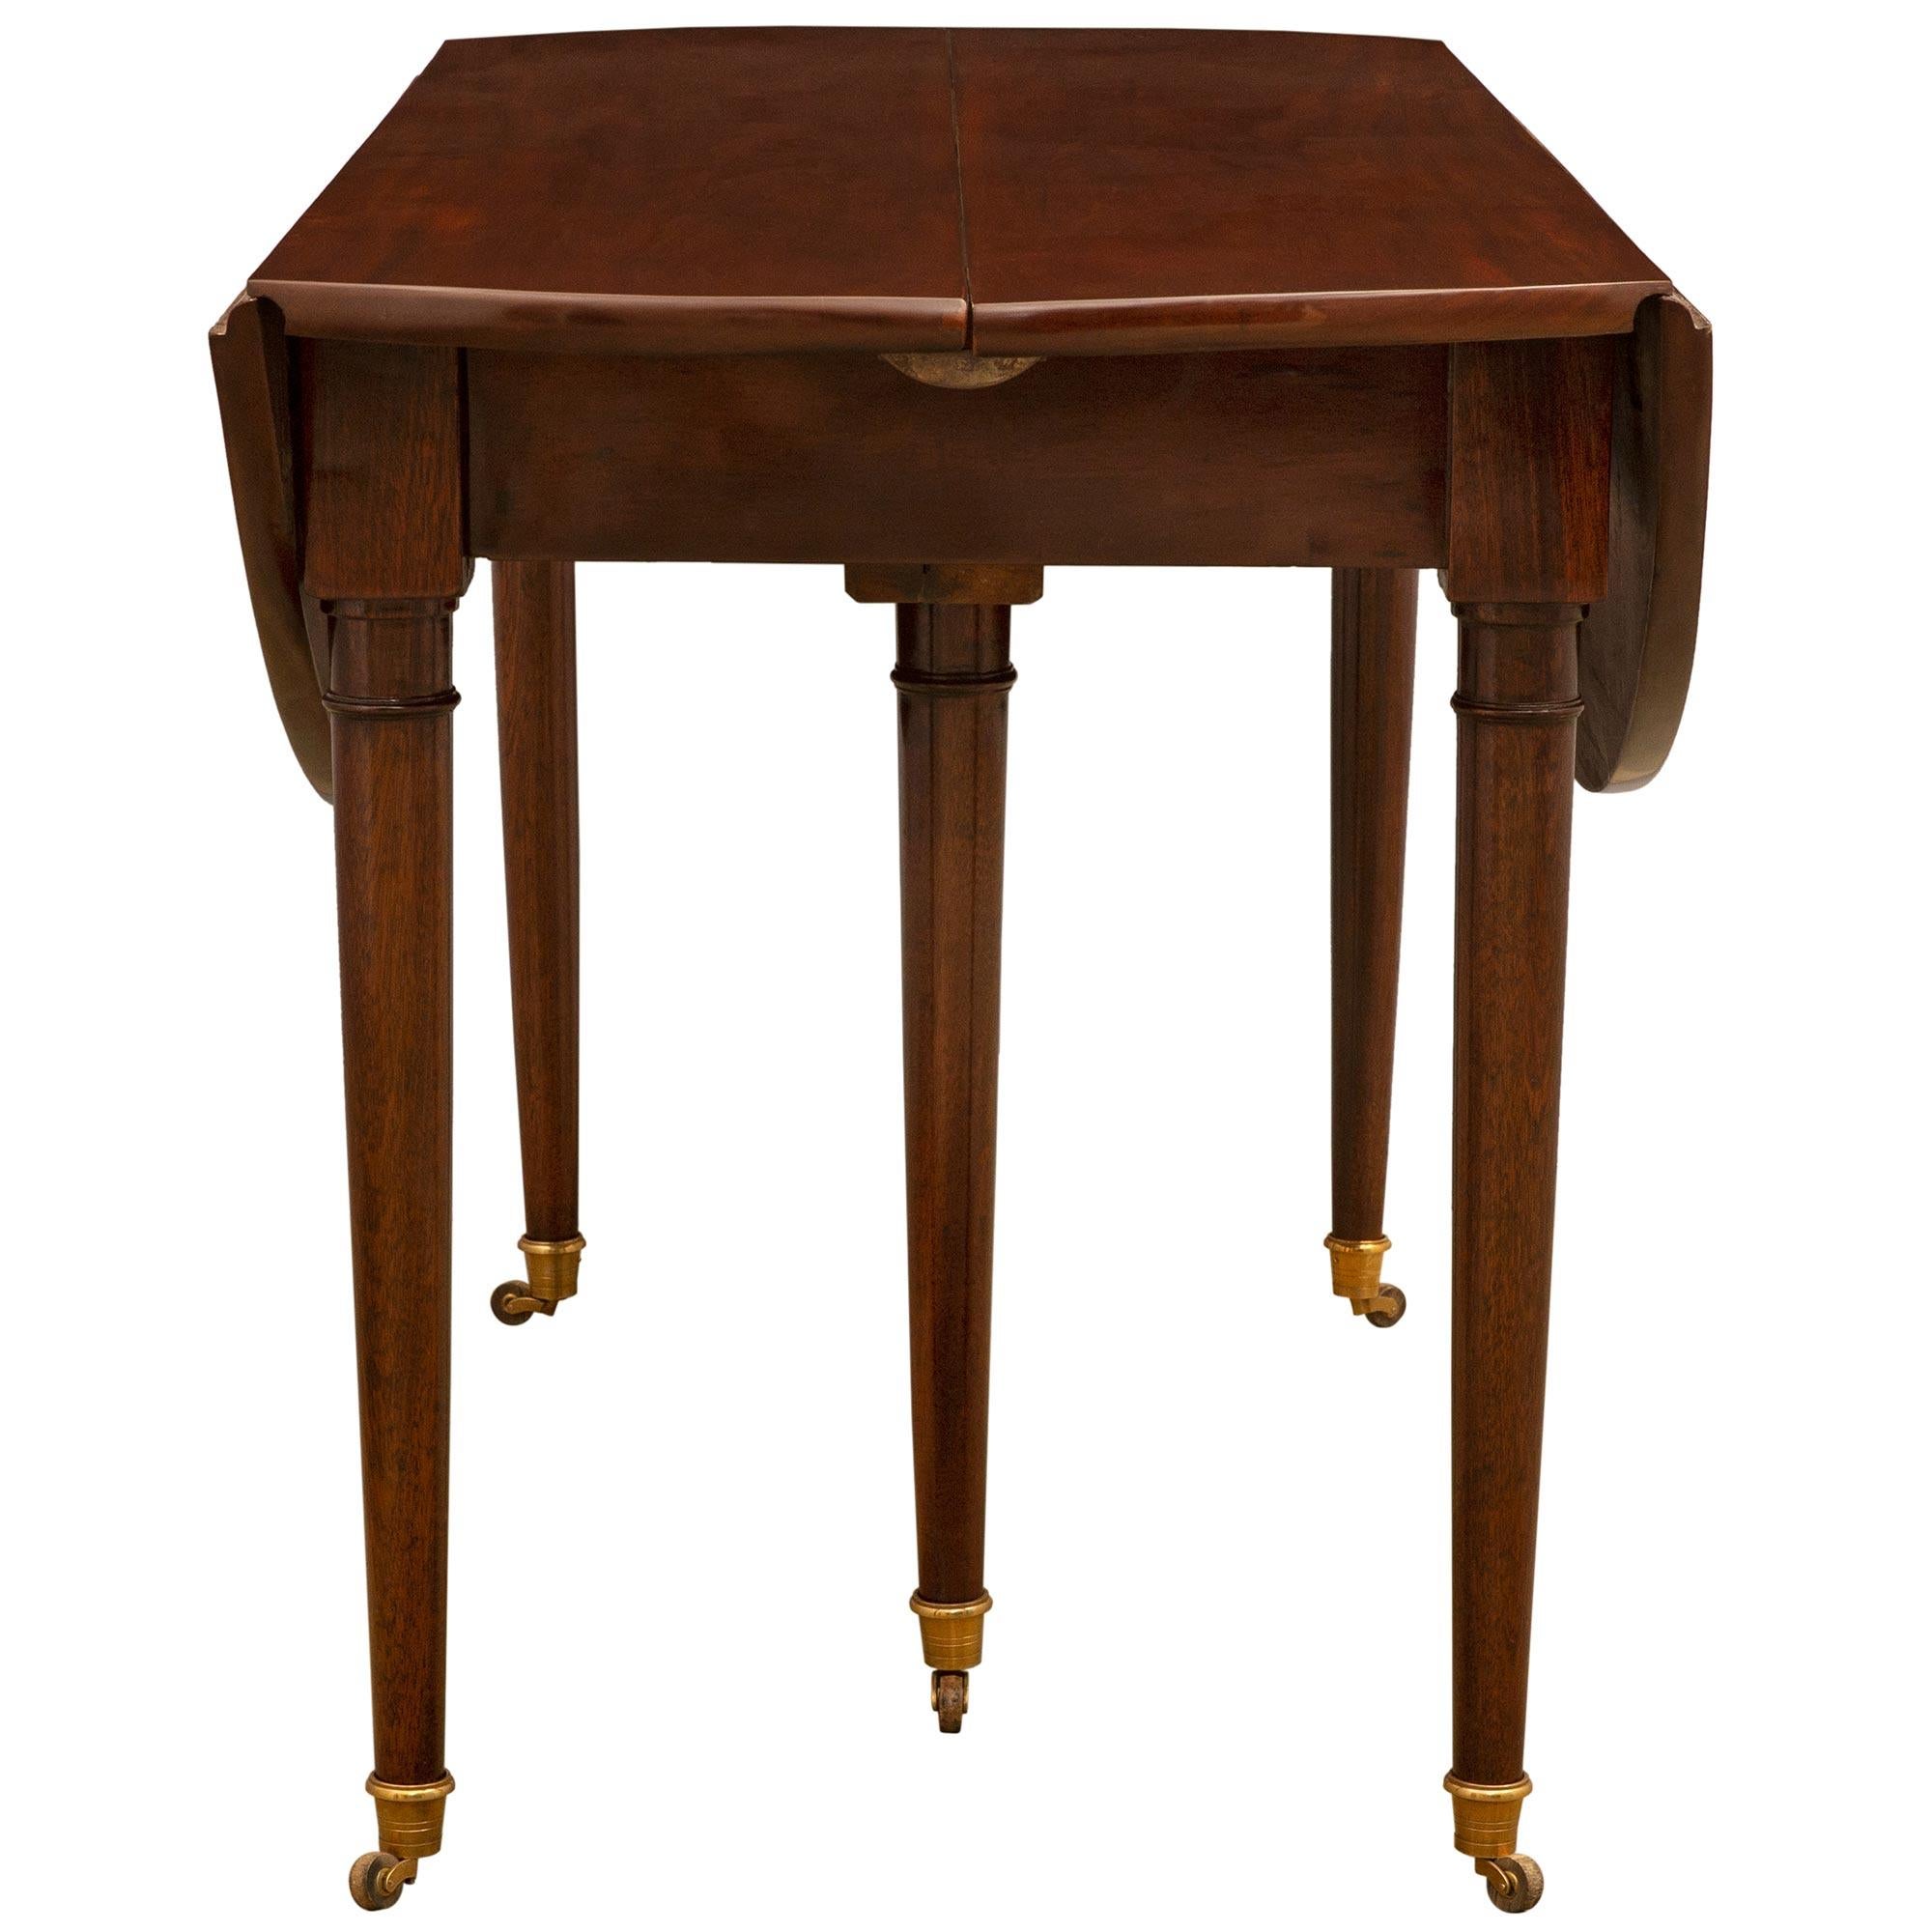 Early 19th Century French Louis XVI Style Mahogany Drop-Leaf Dining Table For Sale 1